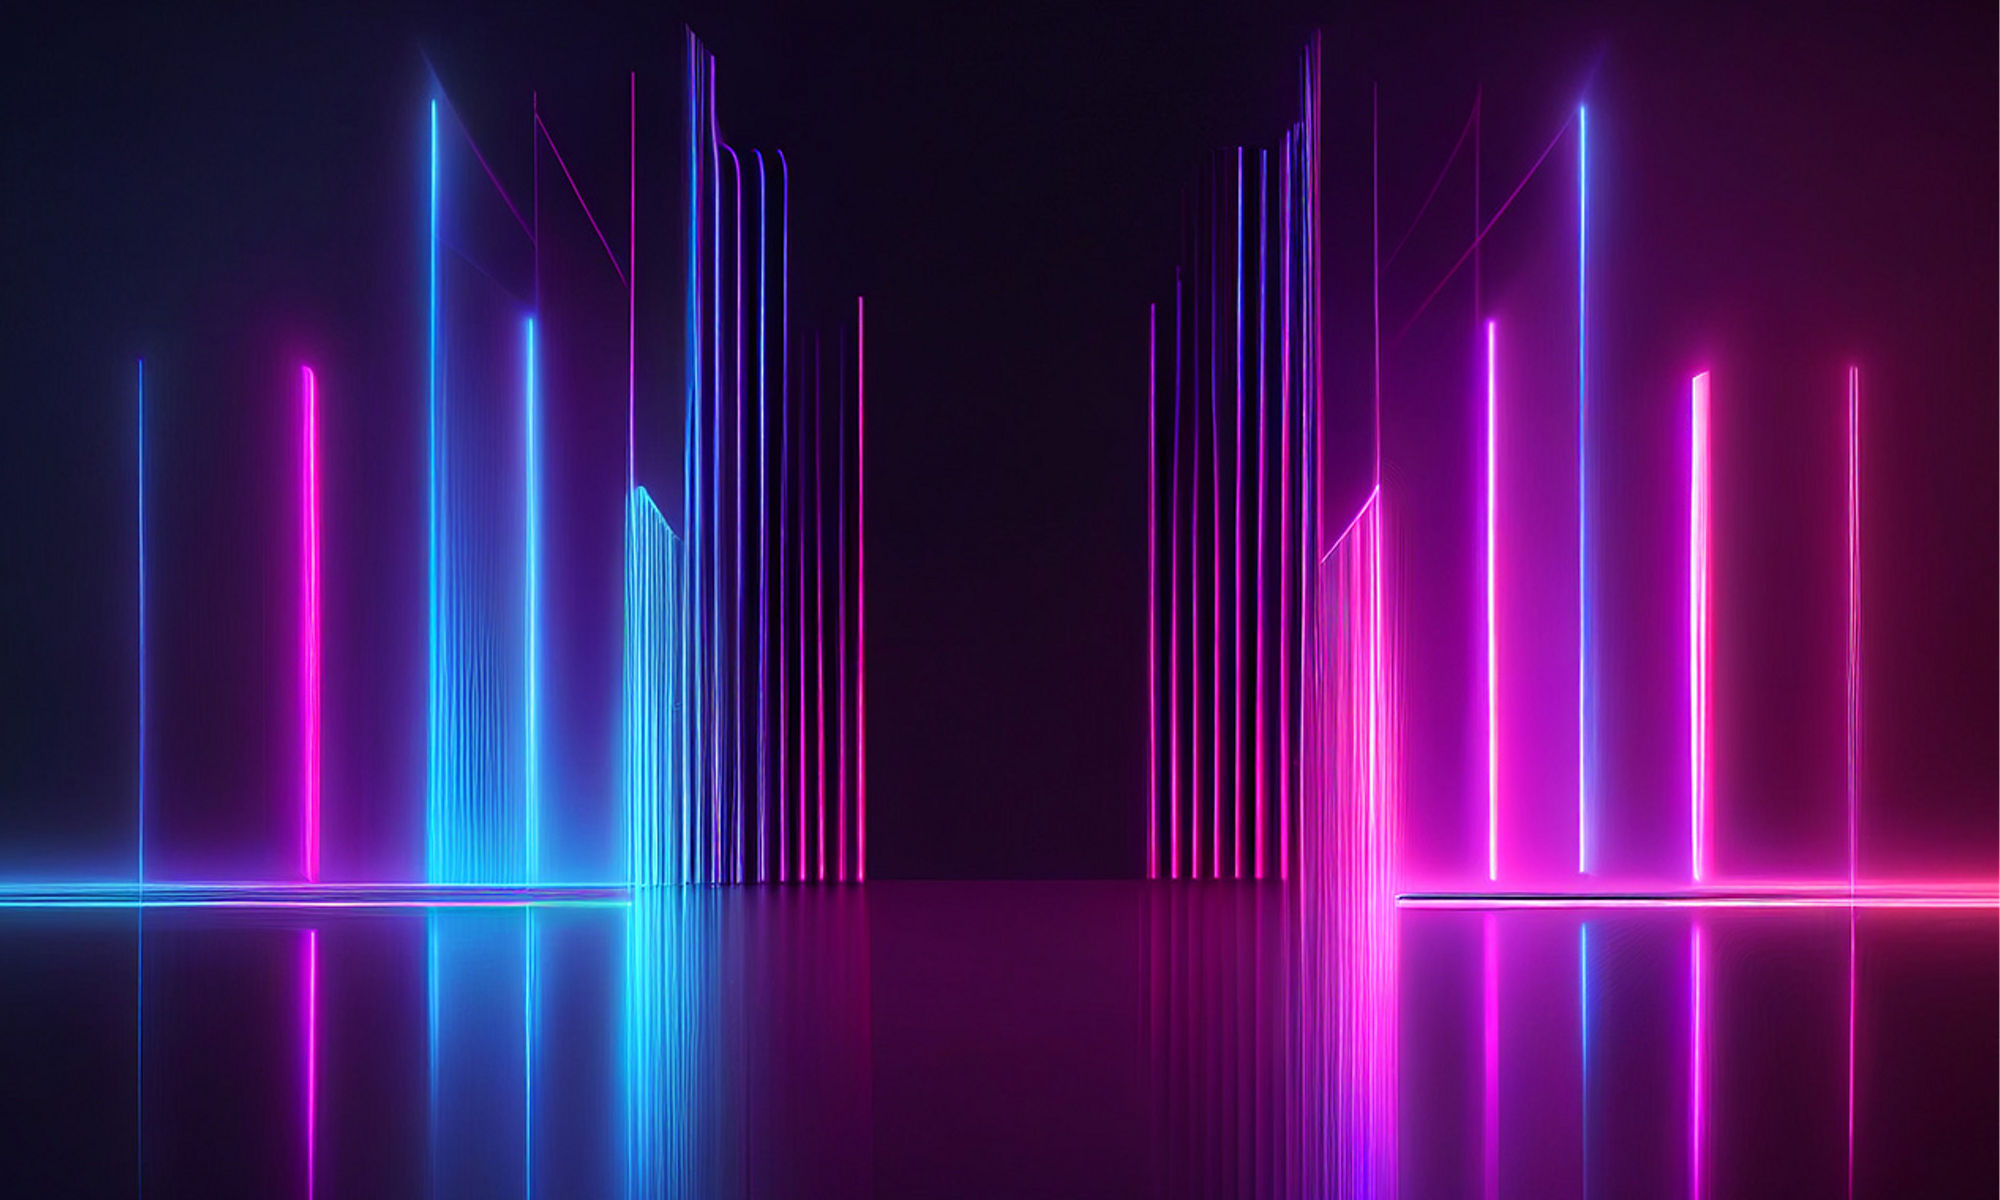 3D abstract render of pink and blue lighted bars and lines receding to background